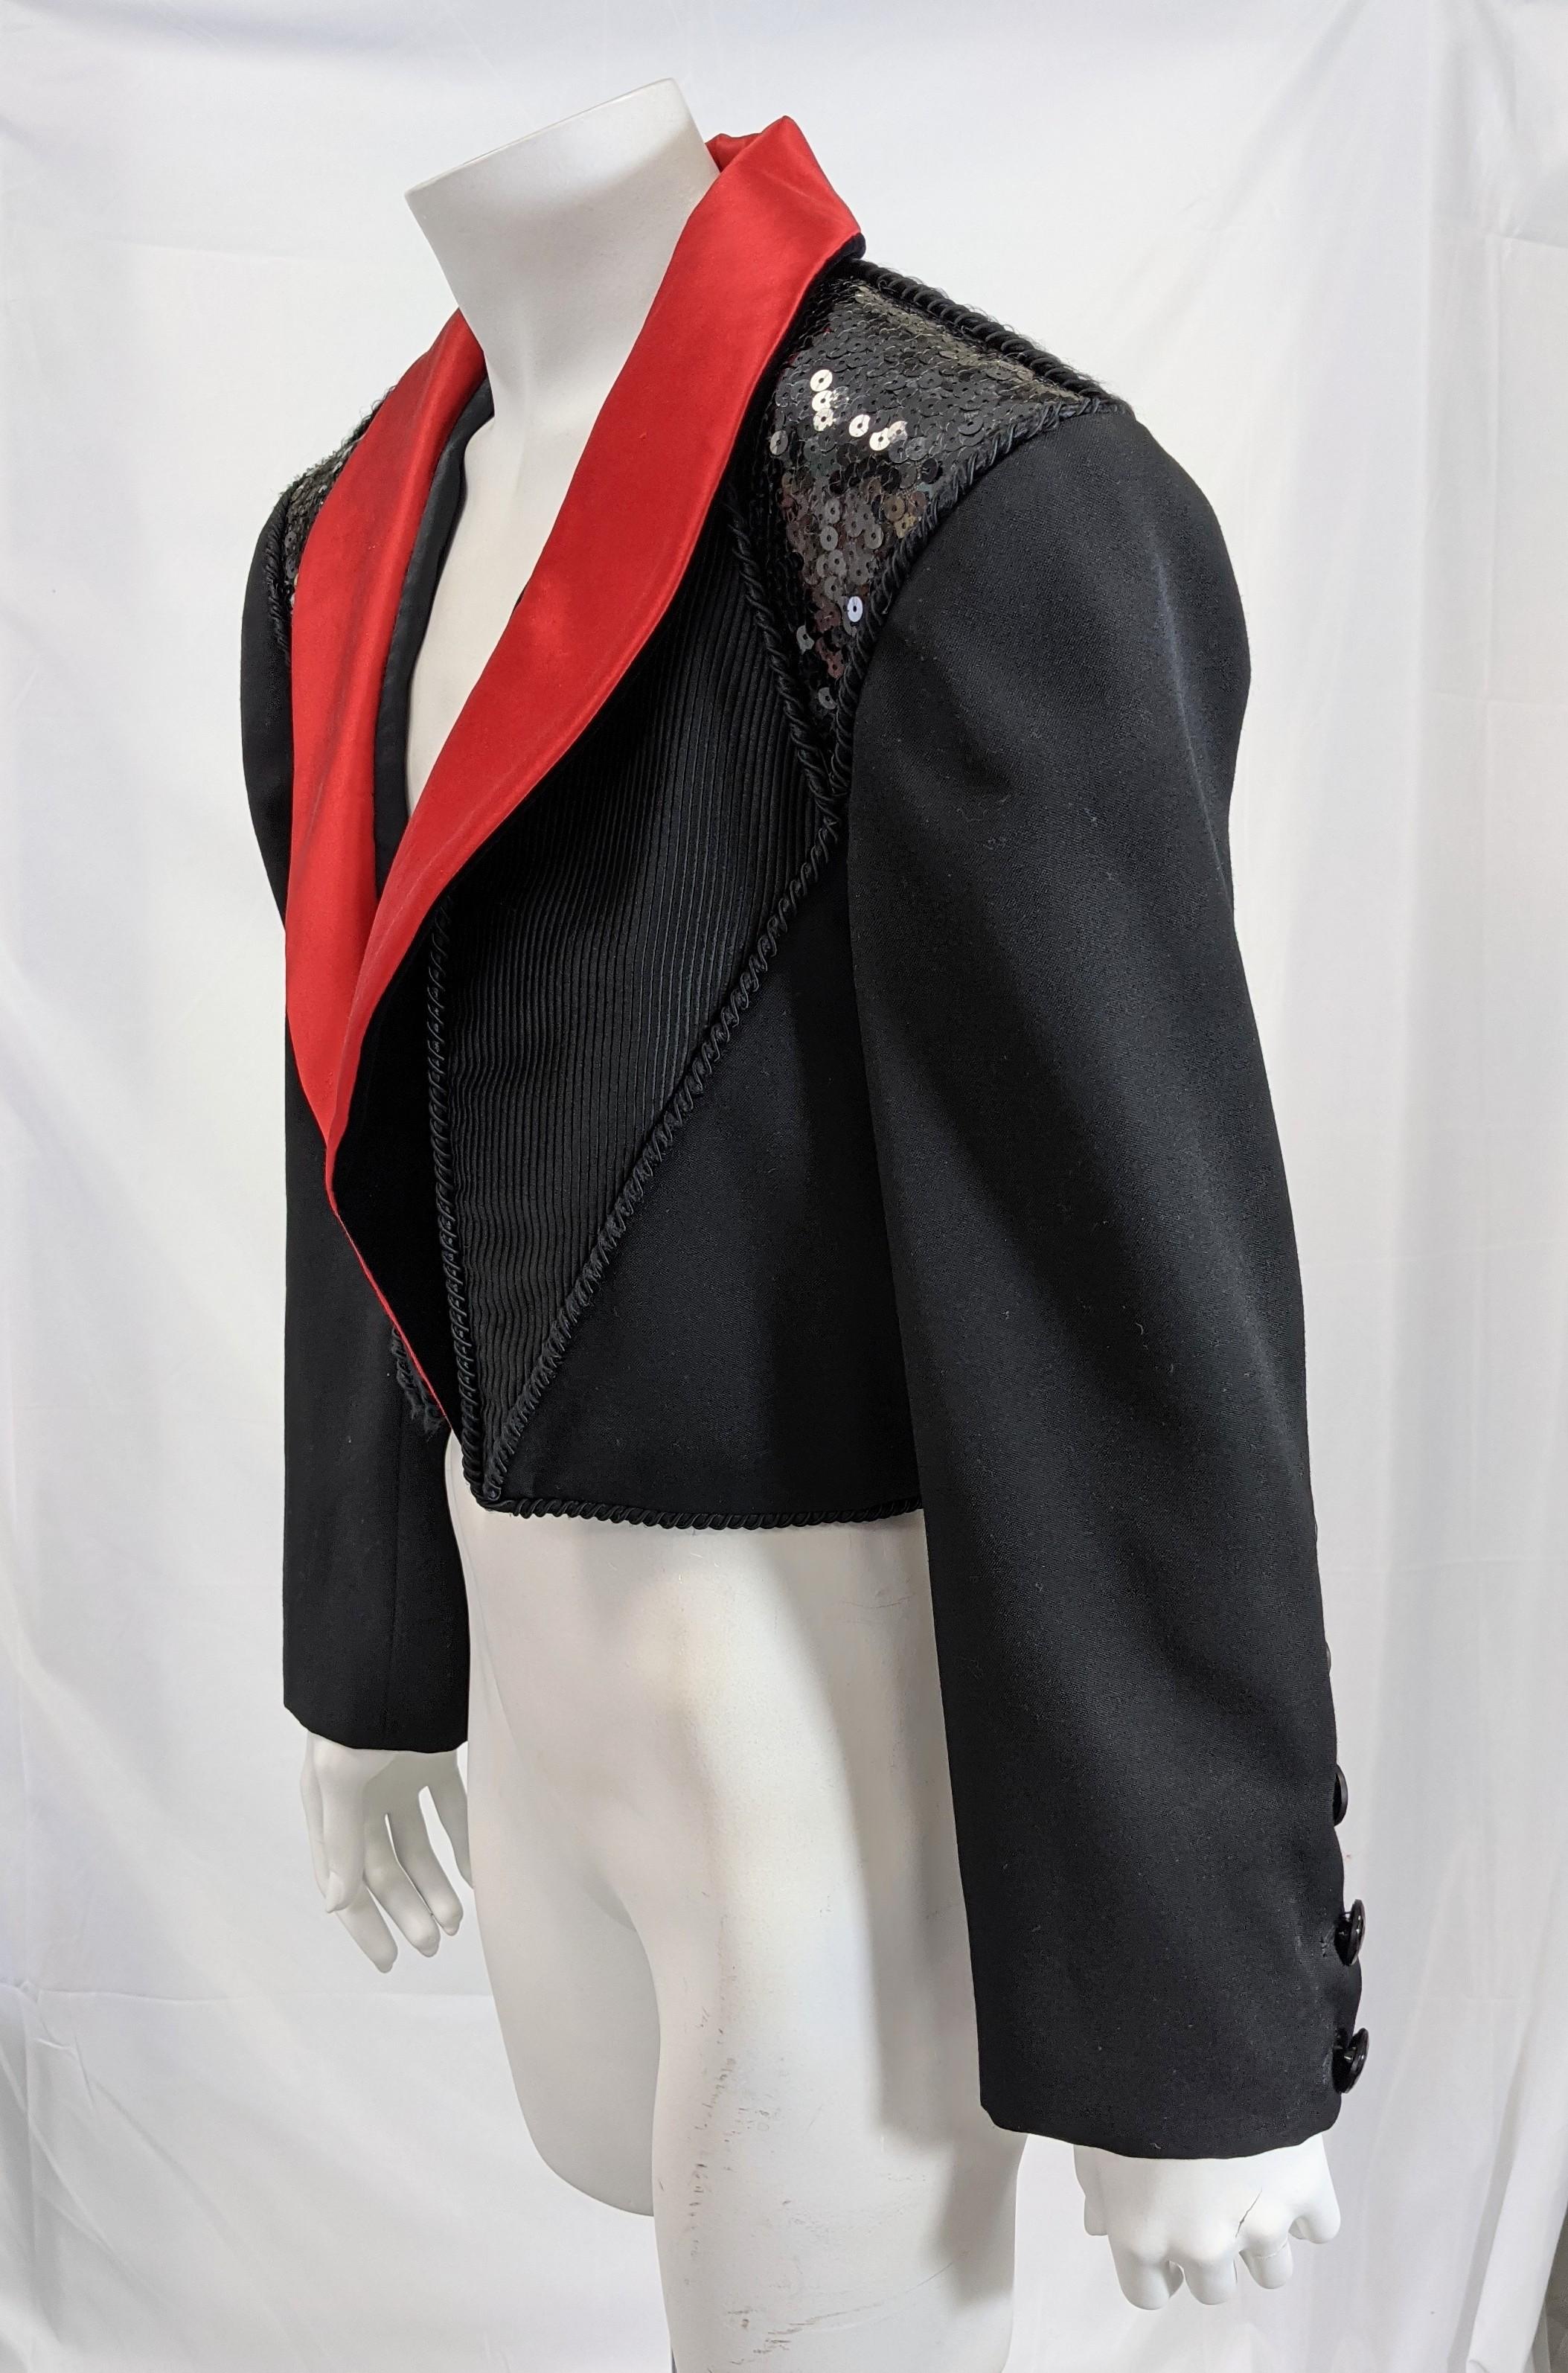 Amazing collectible Yves Saint Laurent Rive Gauche Cropped Tuxedo Jacket, 1989 of silk satin, faille, ottoman, velvet and sequins on a wool base with passementerie trim. 
Large important shoulders and a line of jet buttons up almost to elbow.
Size